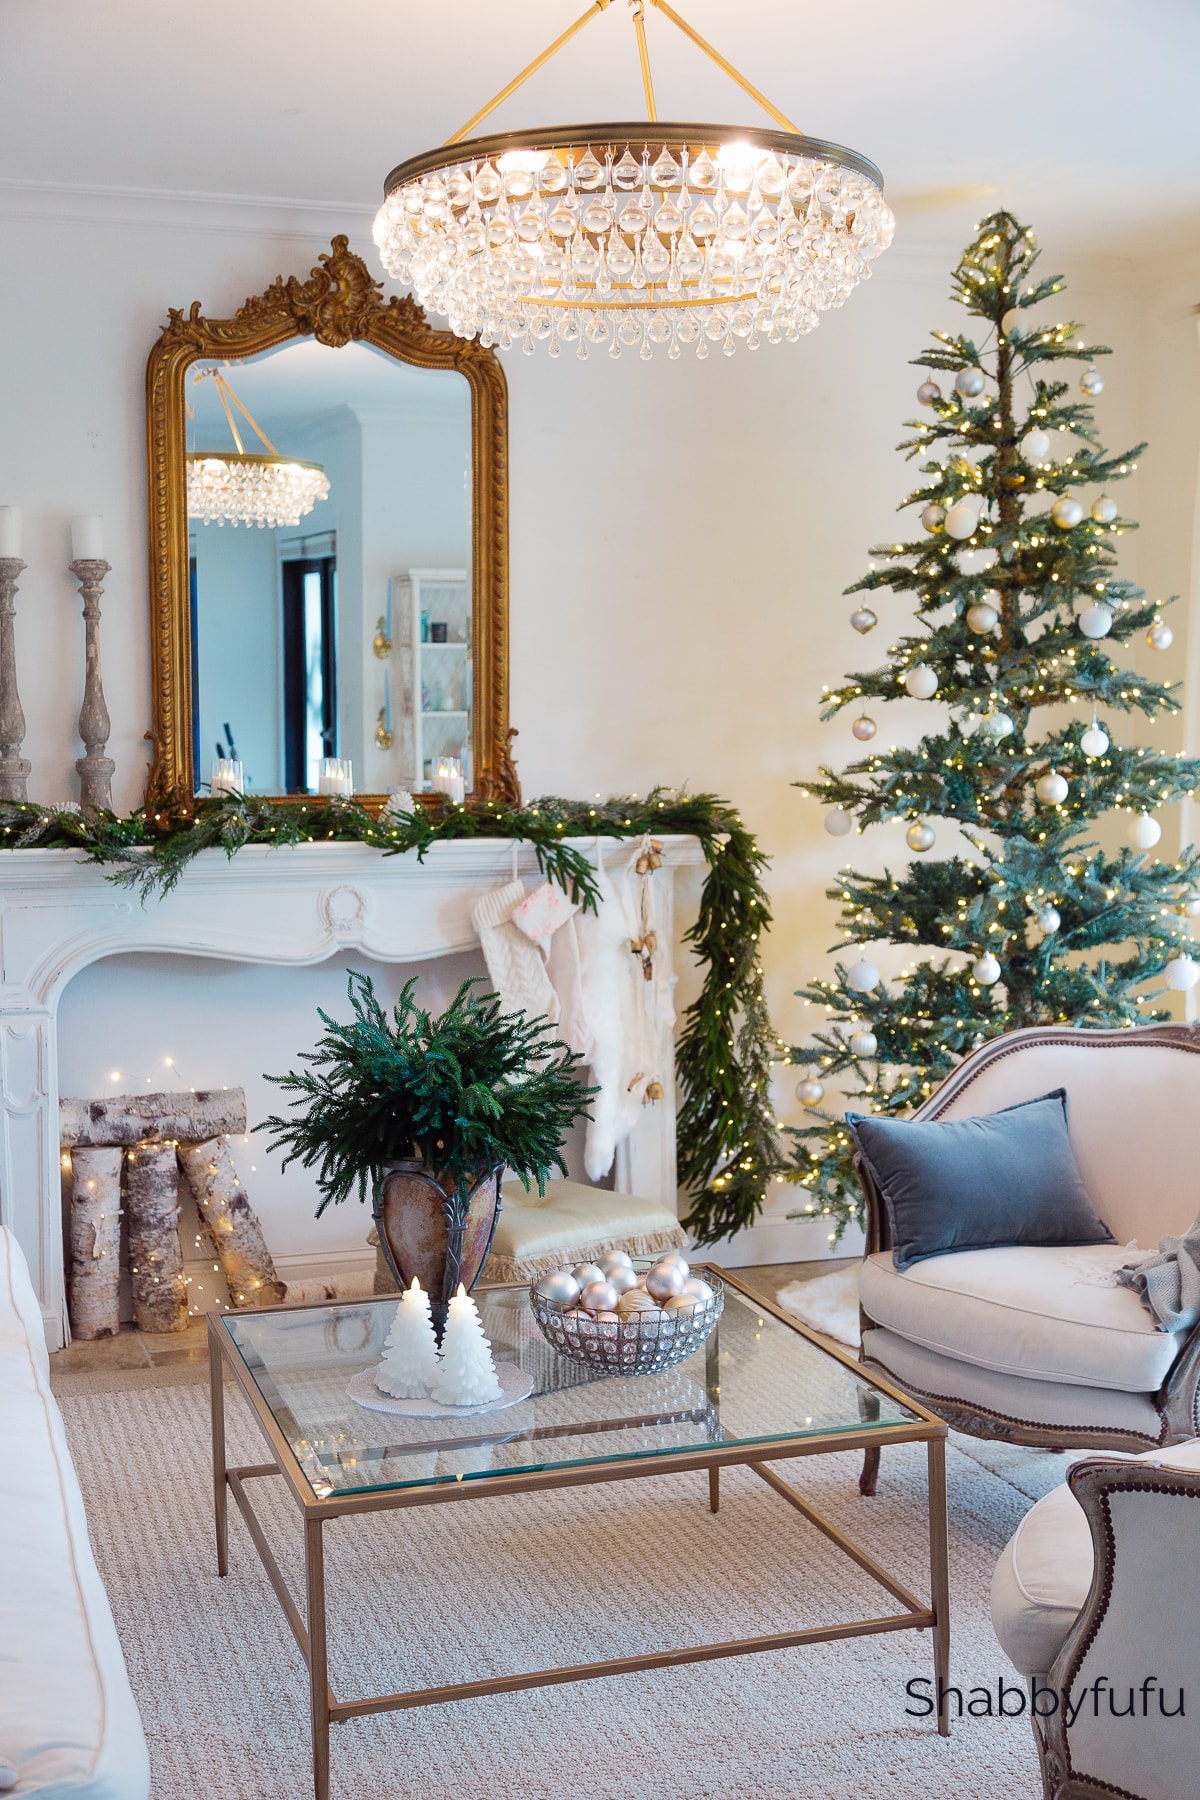 French country inspired living room at Christmas